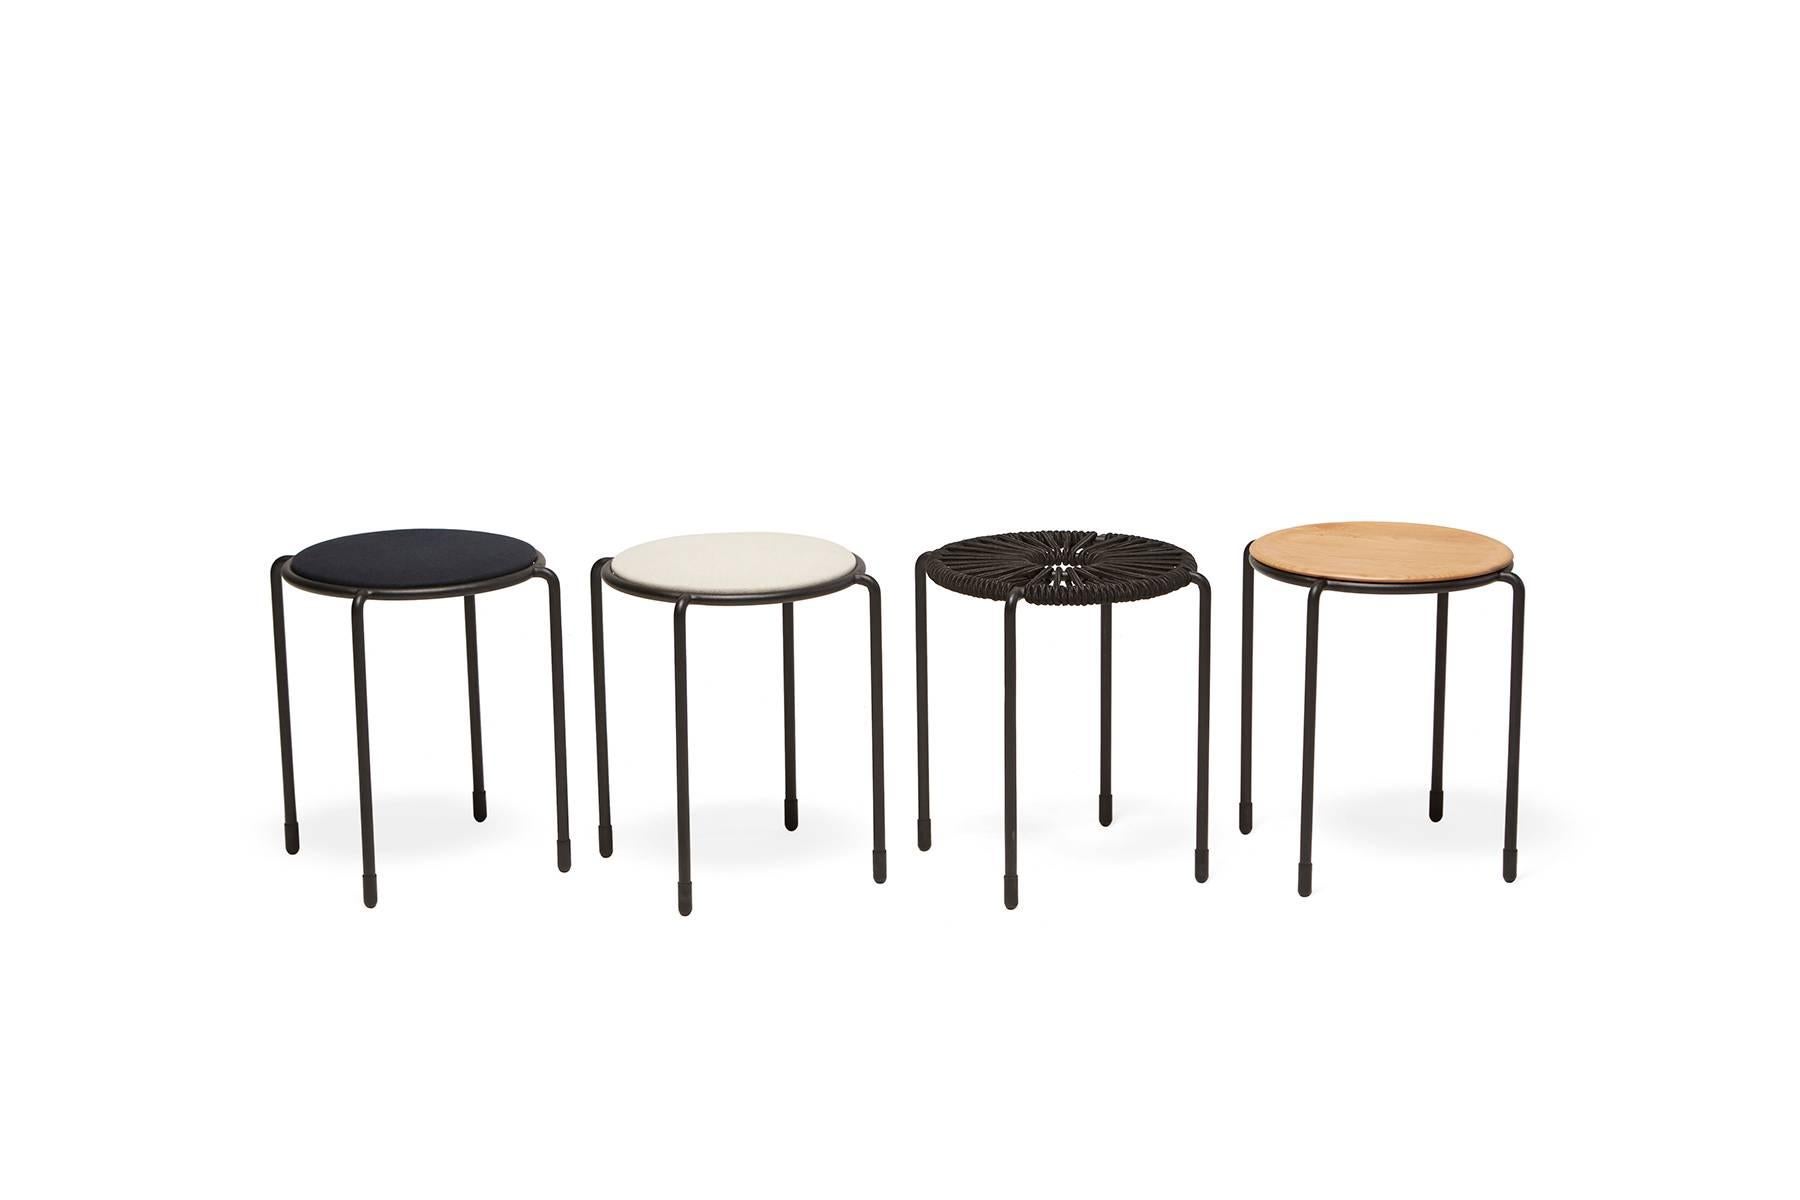 Powder-Coated Bowline Stool in Cream Canvas - In Stock